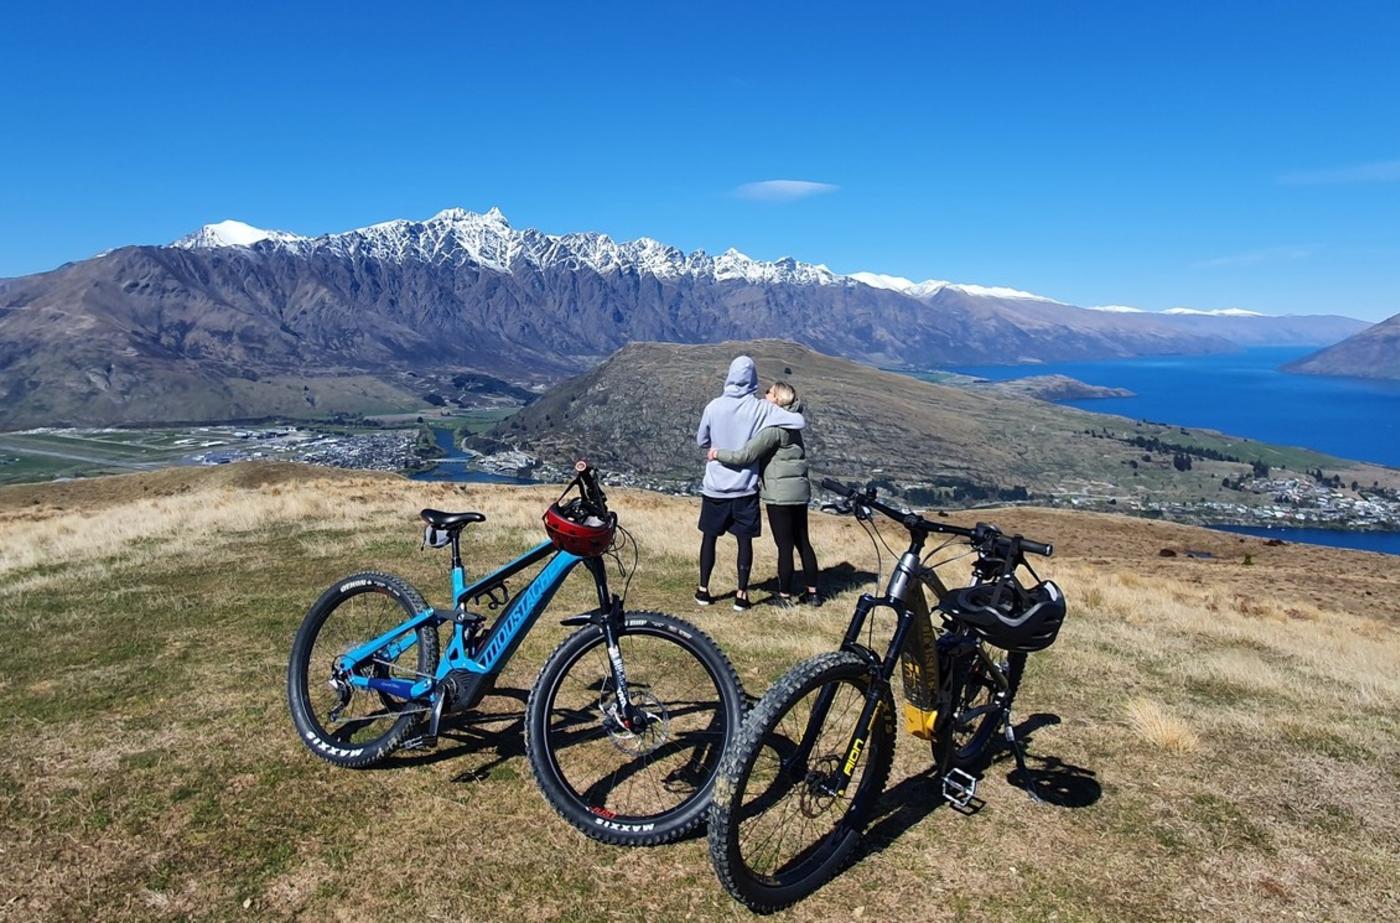 Two people with bikes standing on a mountain overlooking snowy peaks and lake